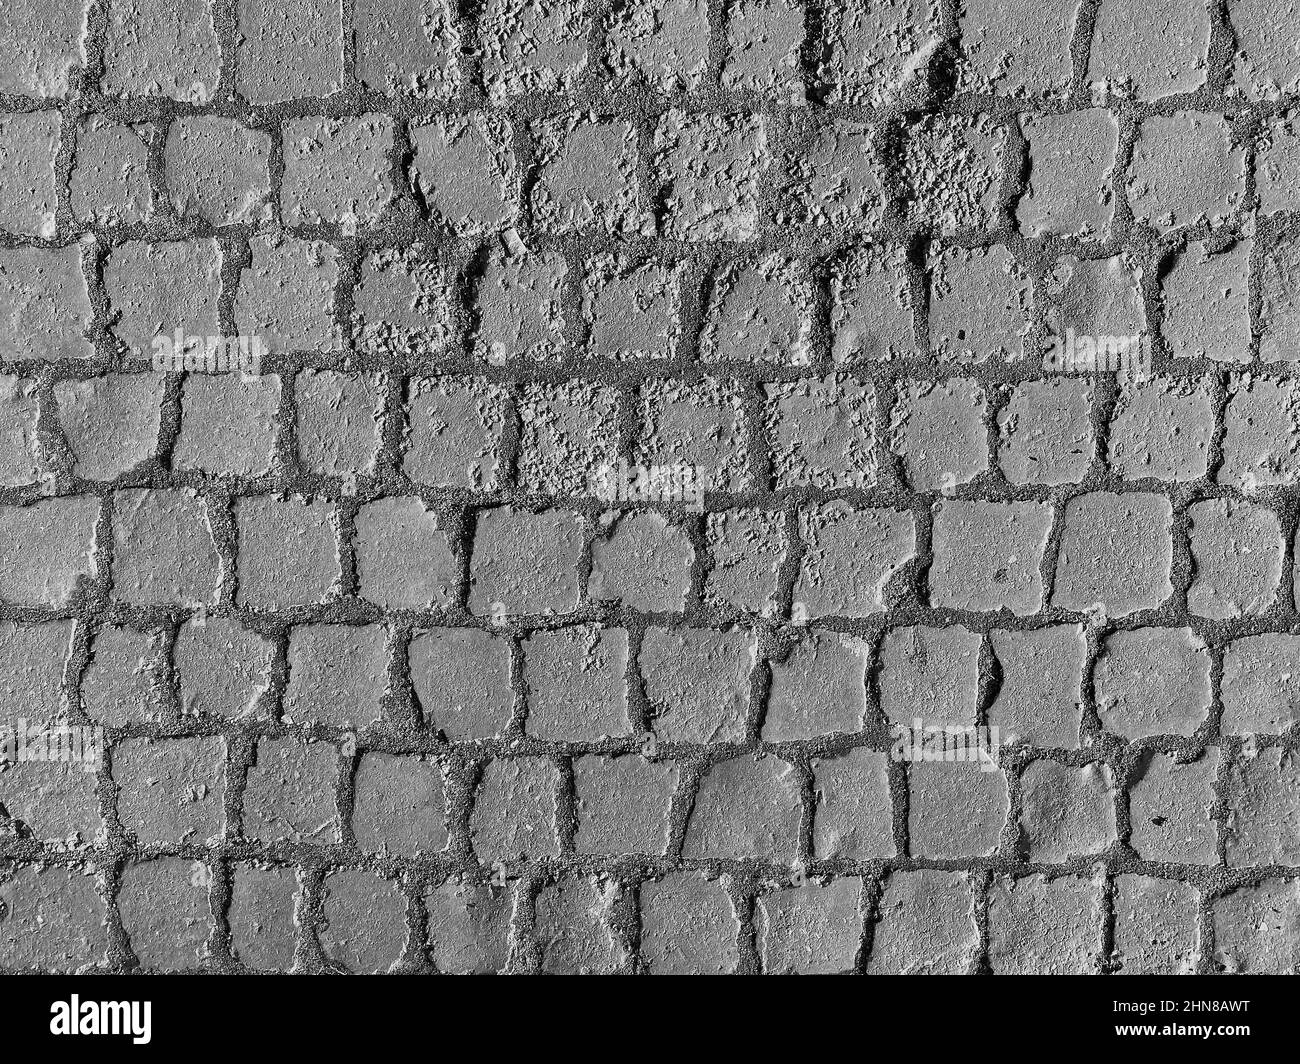 abstract construction background: black and white photo of square paving stones Stock Photo